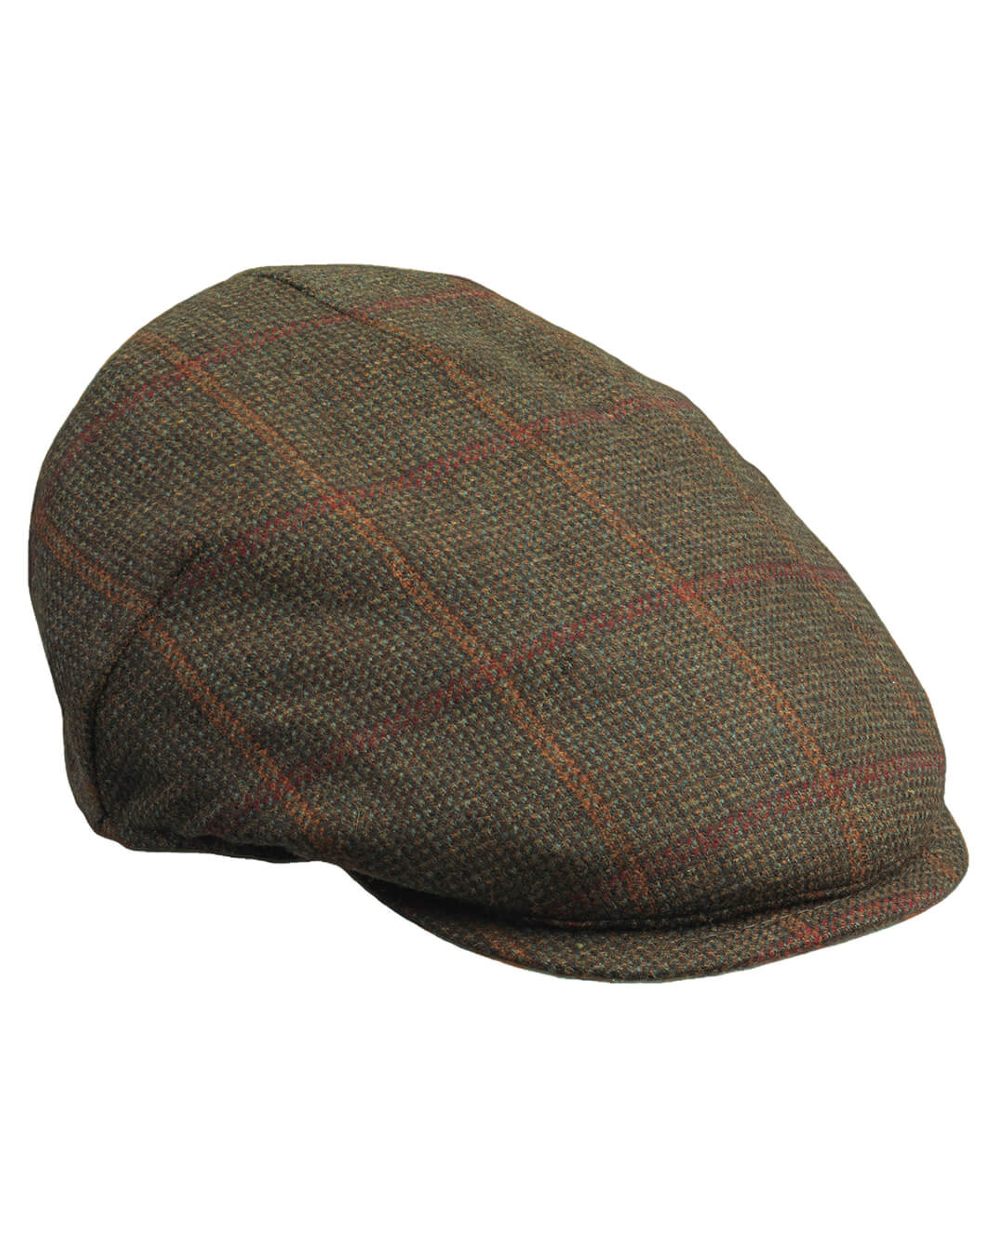 Laksen Hastings Drivers Flat Cap On A White Background